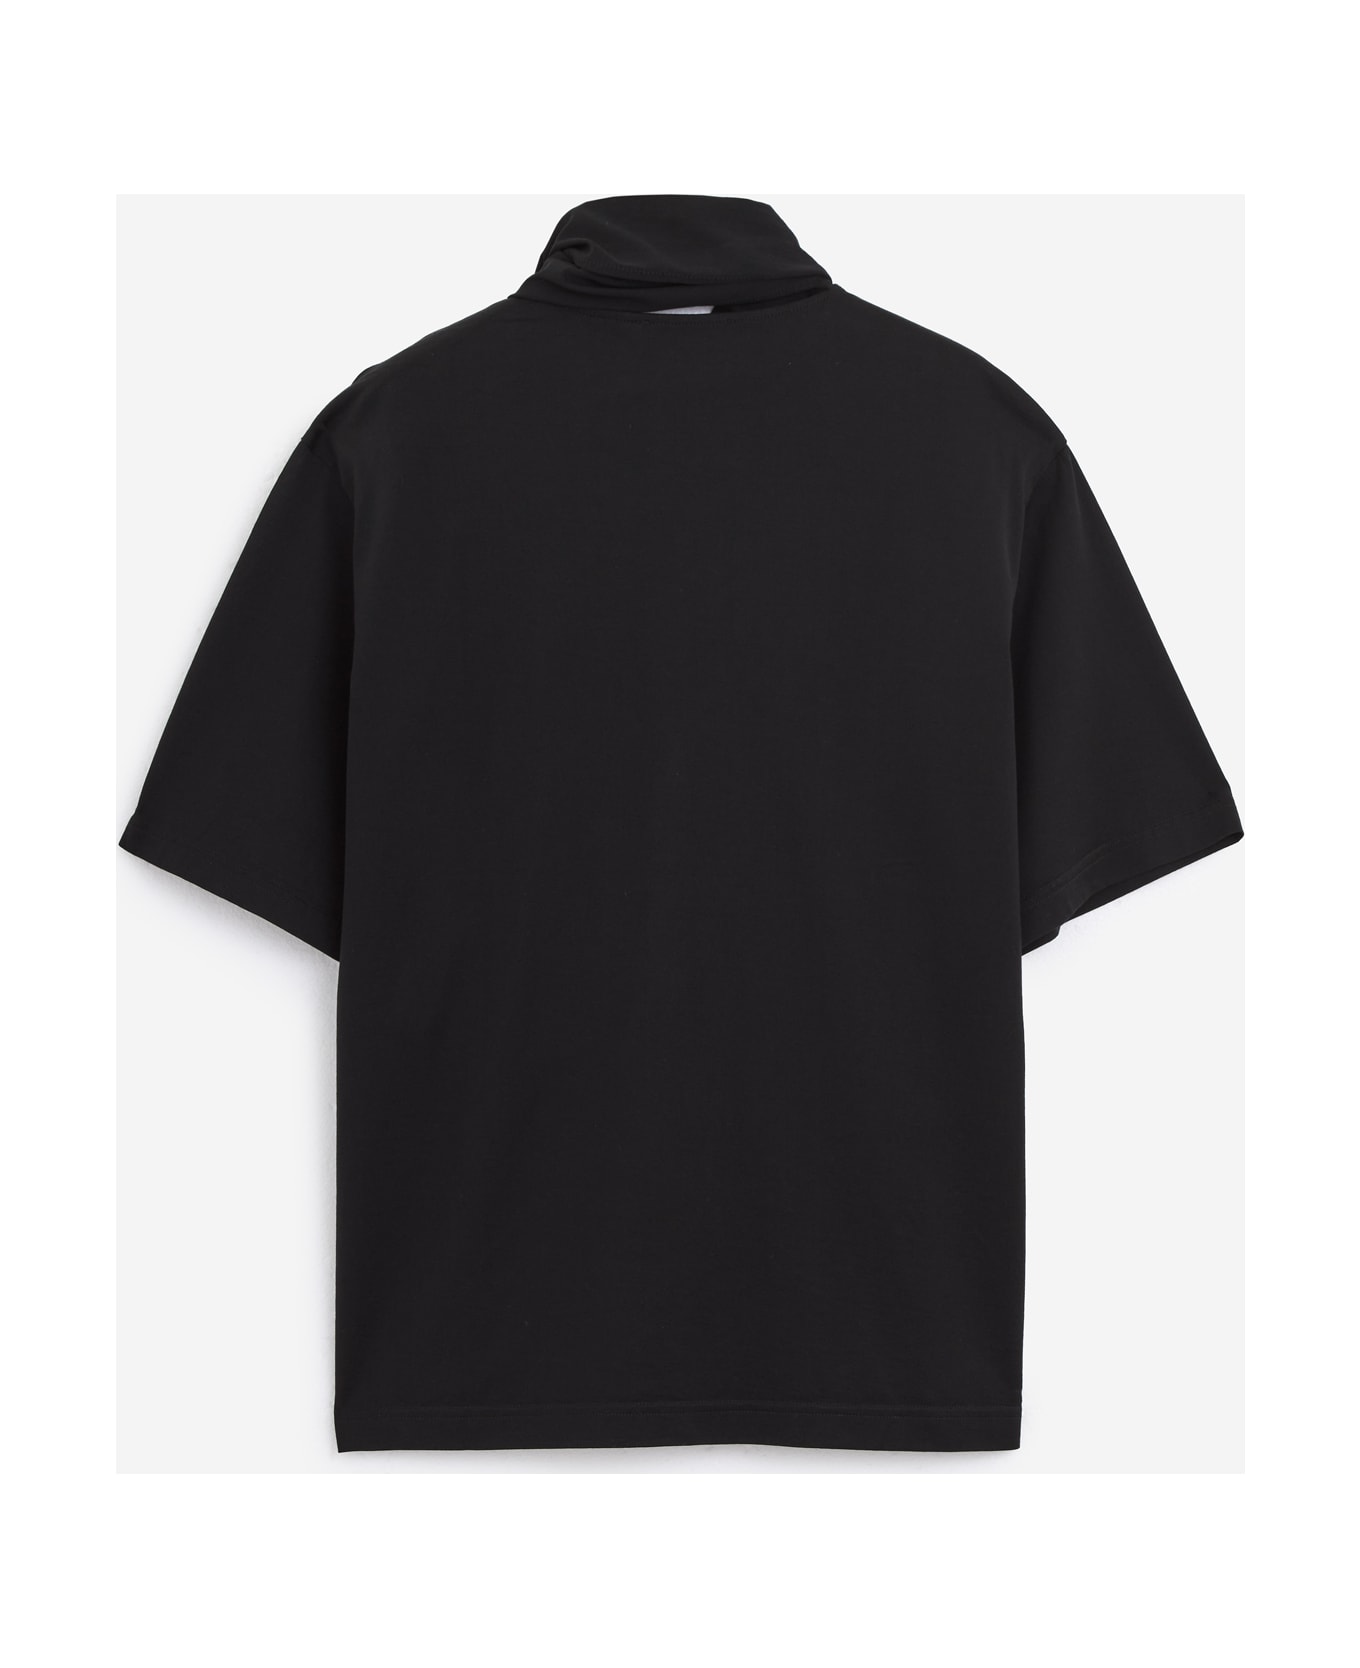 Lemaire T-shirt With Foulard T-shirt - black ポロシャツ